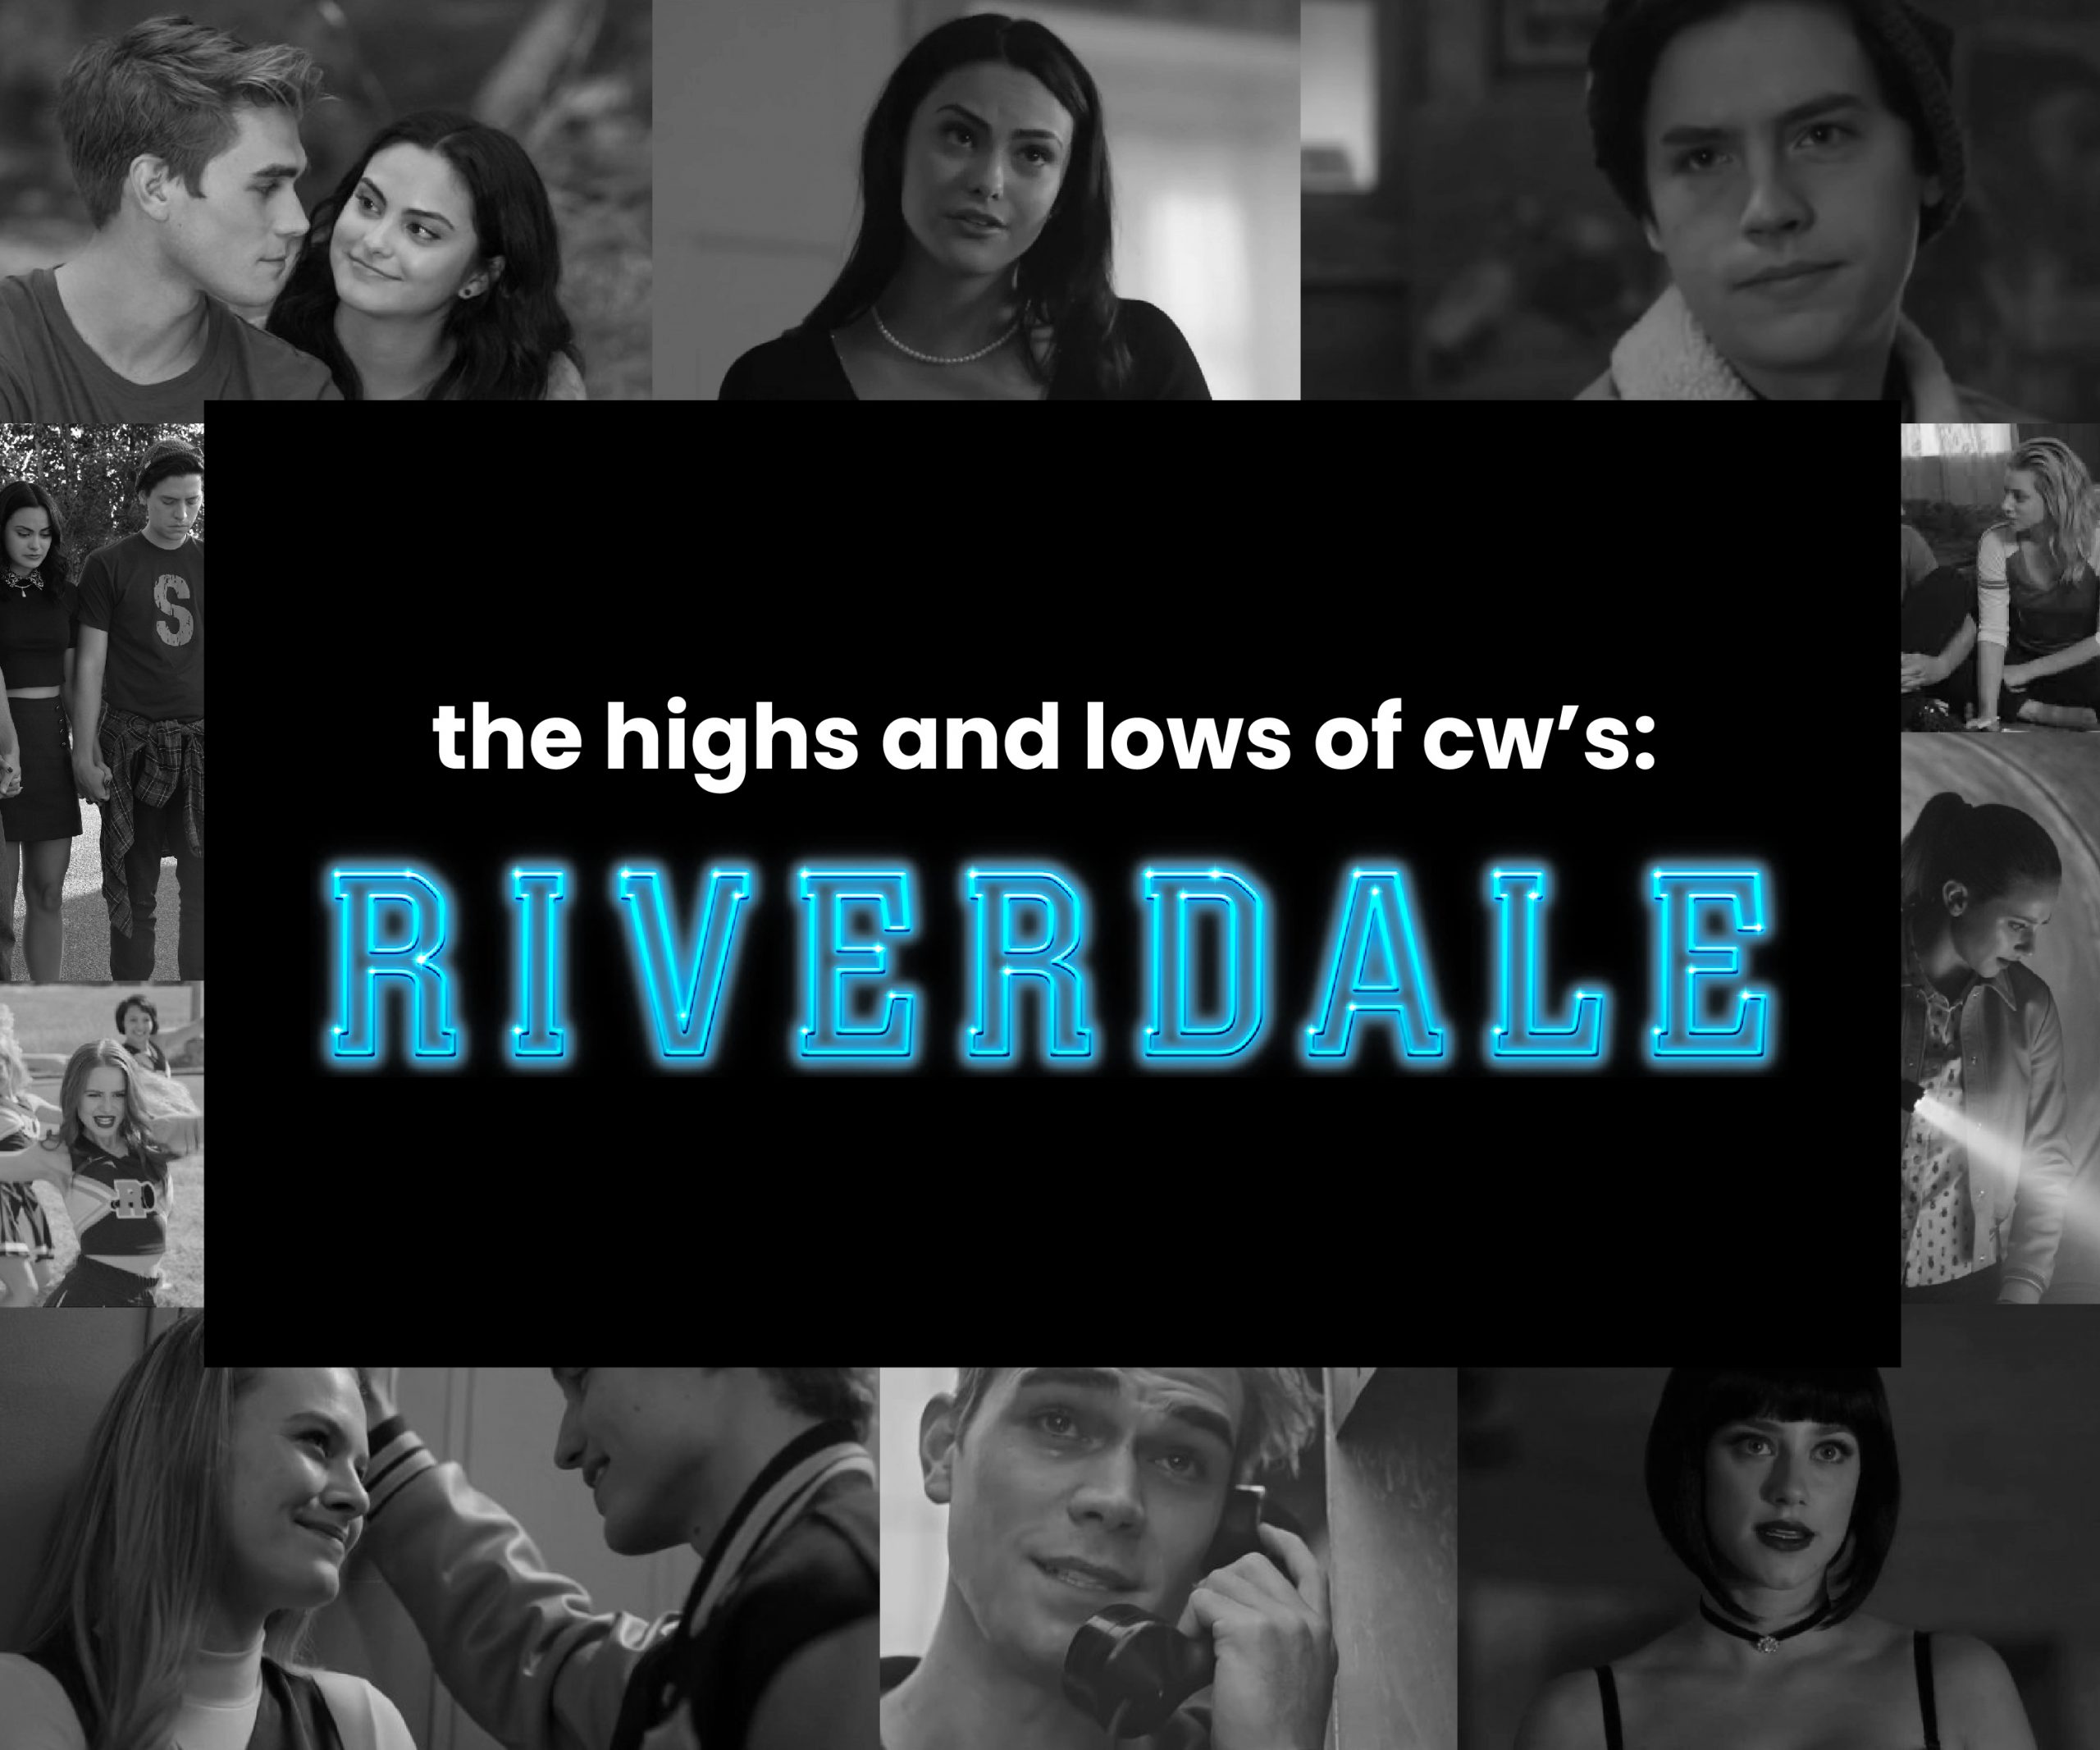 The Epic Highs and Lows of Riverdale